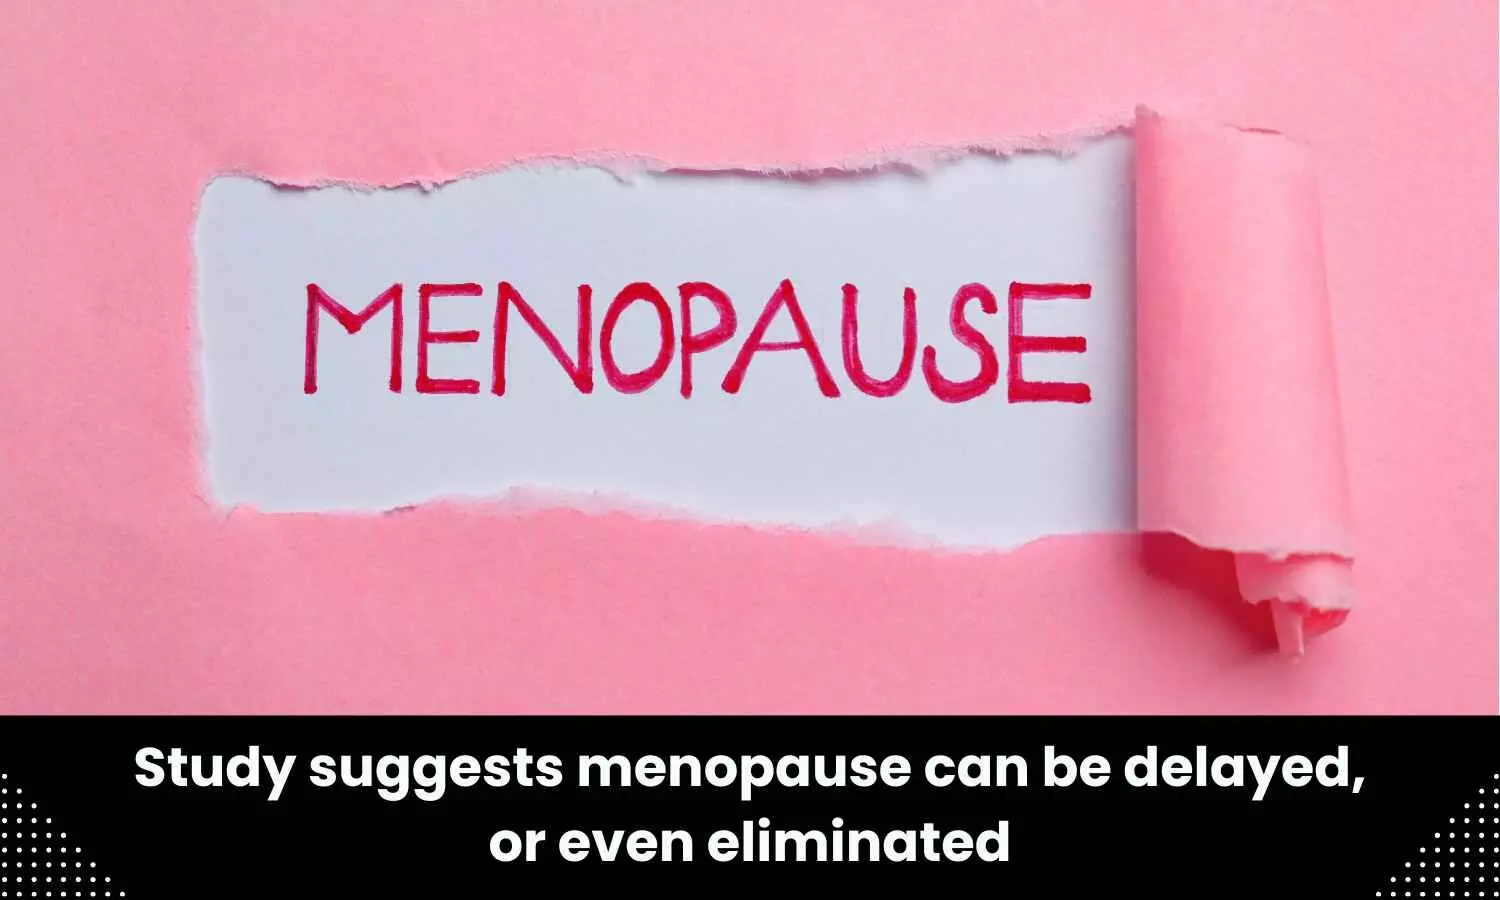 Menopause can be delayed, or even eliminated: Study